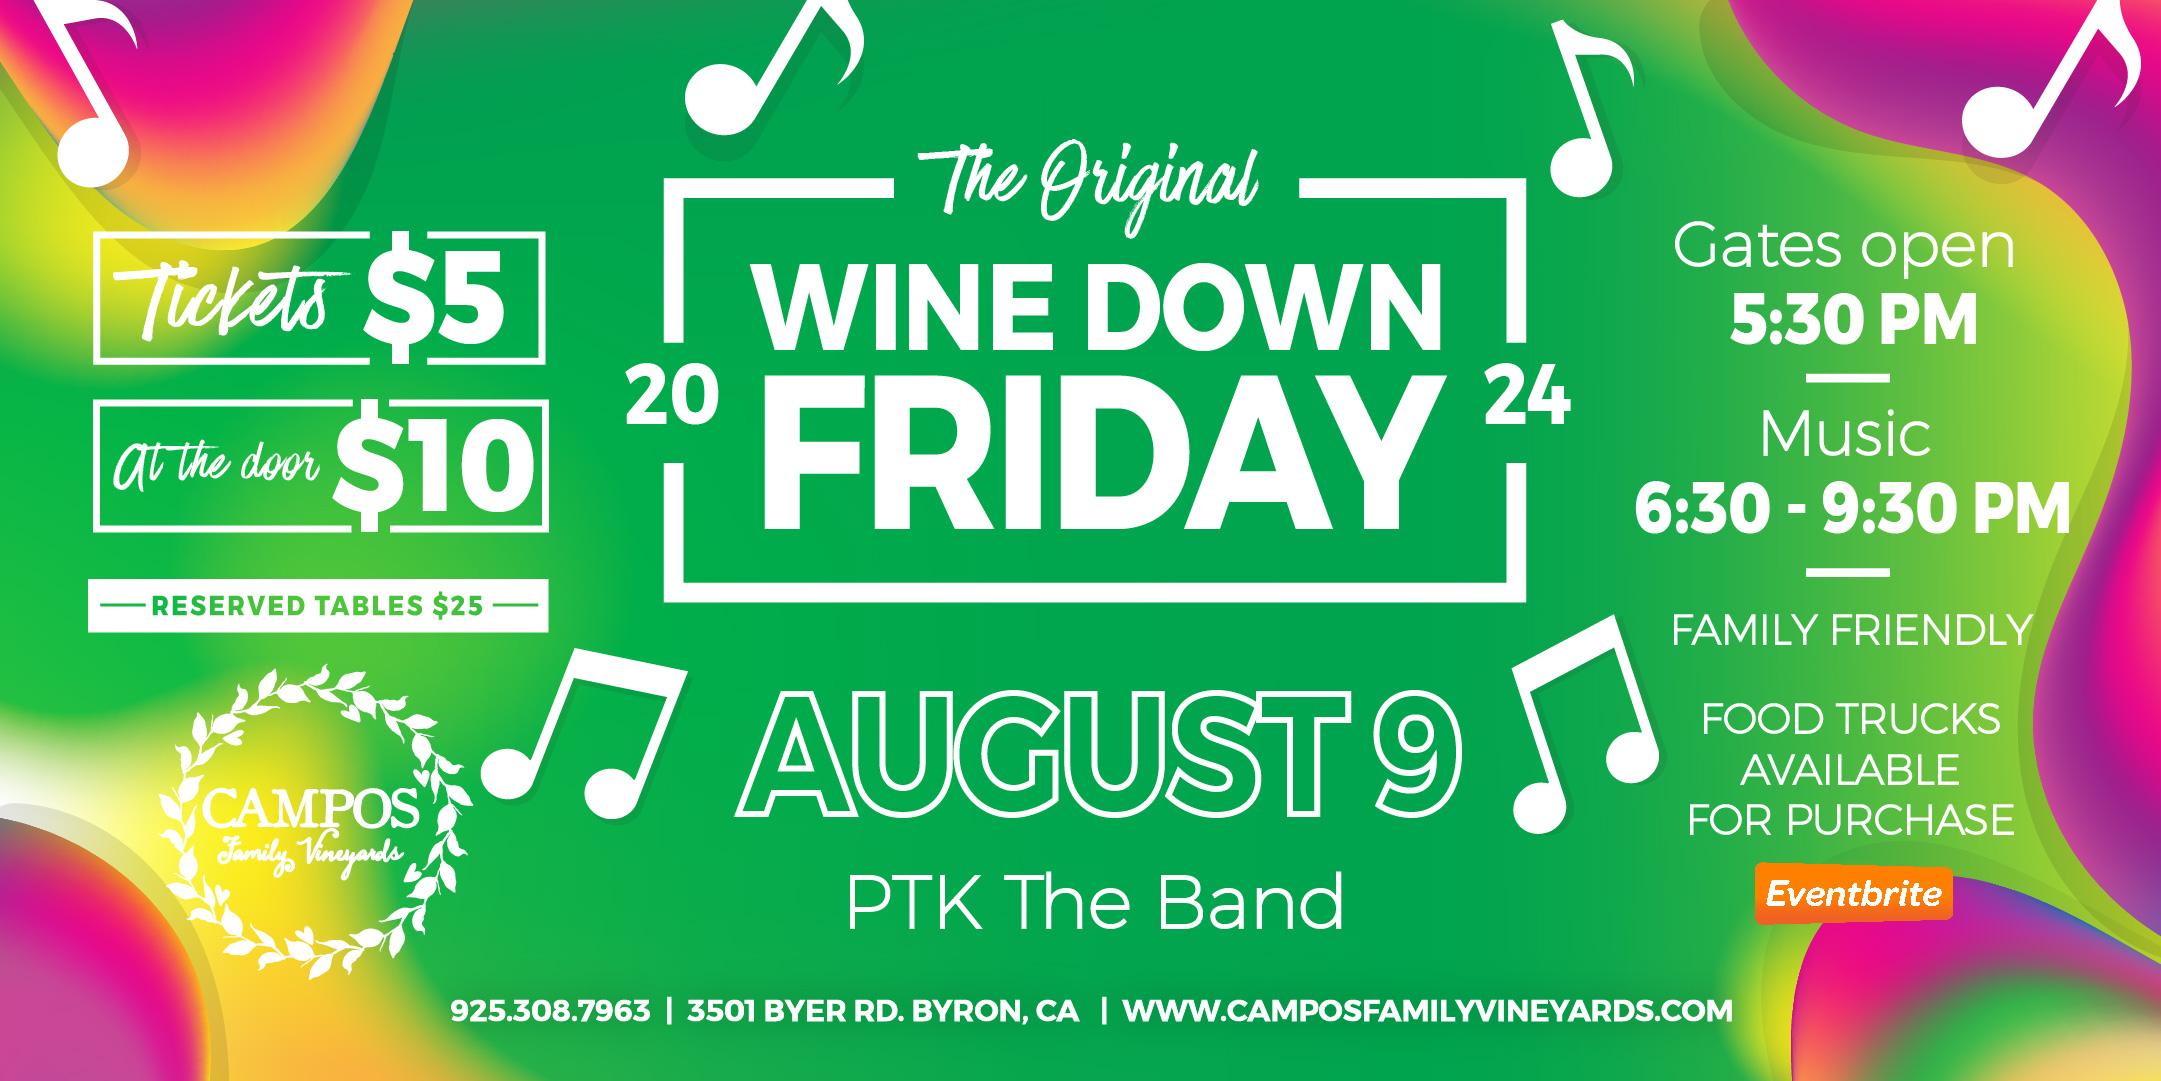 The Original Wine Down Friday - PTK The Band